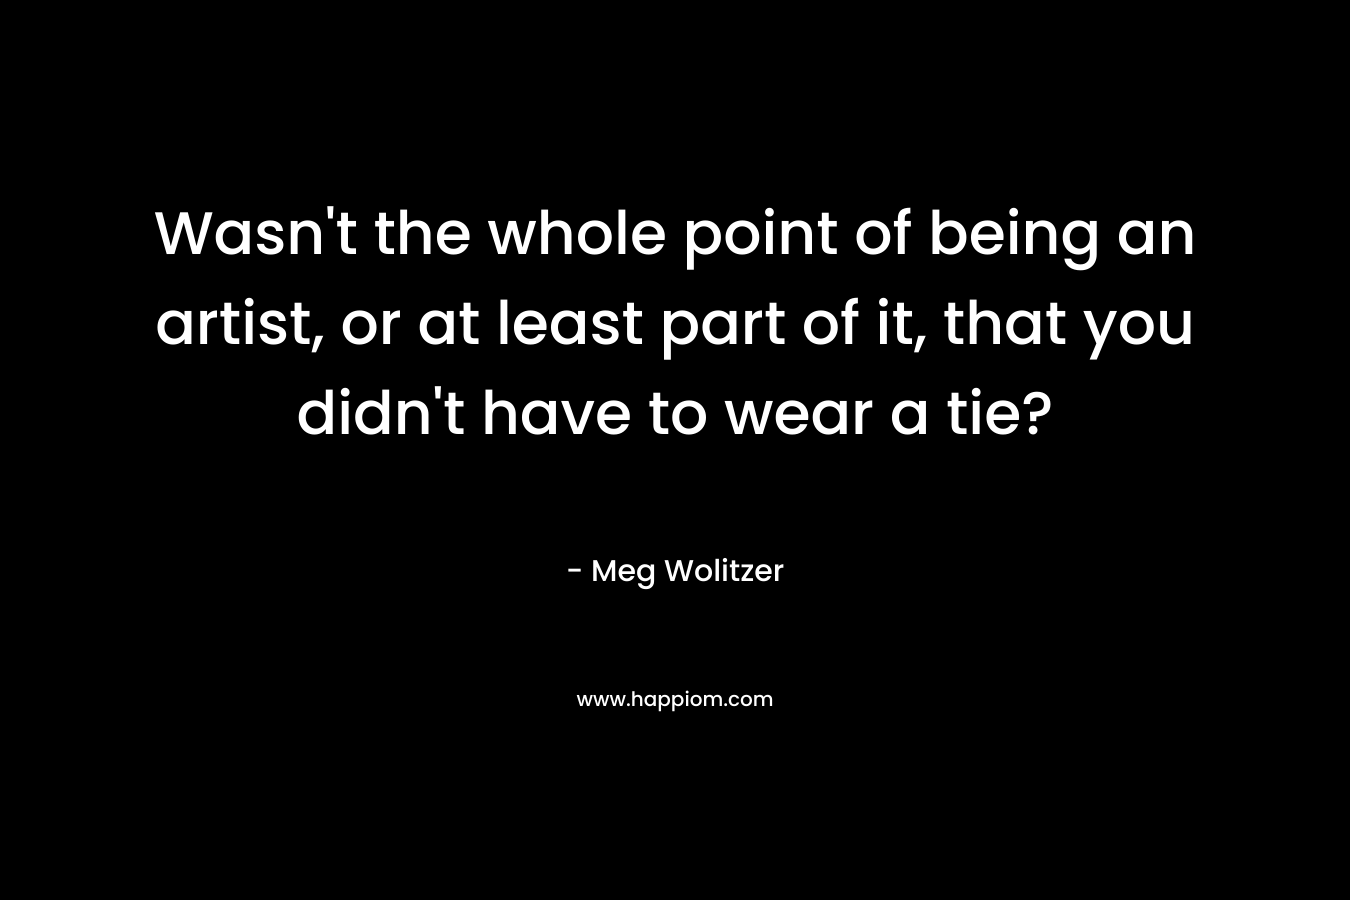 Wasn’t the whole point of being an artist, or at least part of it, that you didn’t have to wear a tie? – Meg Wolitzer